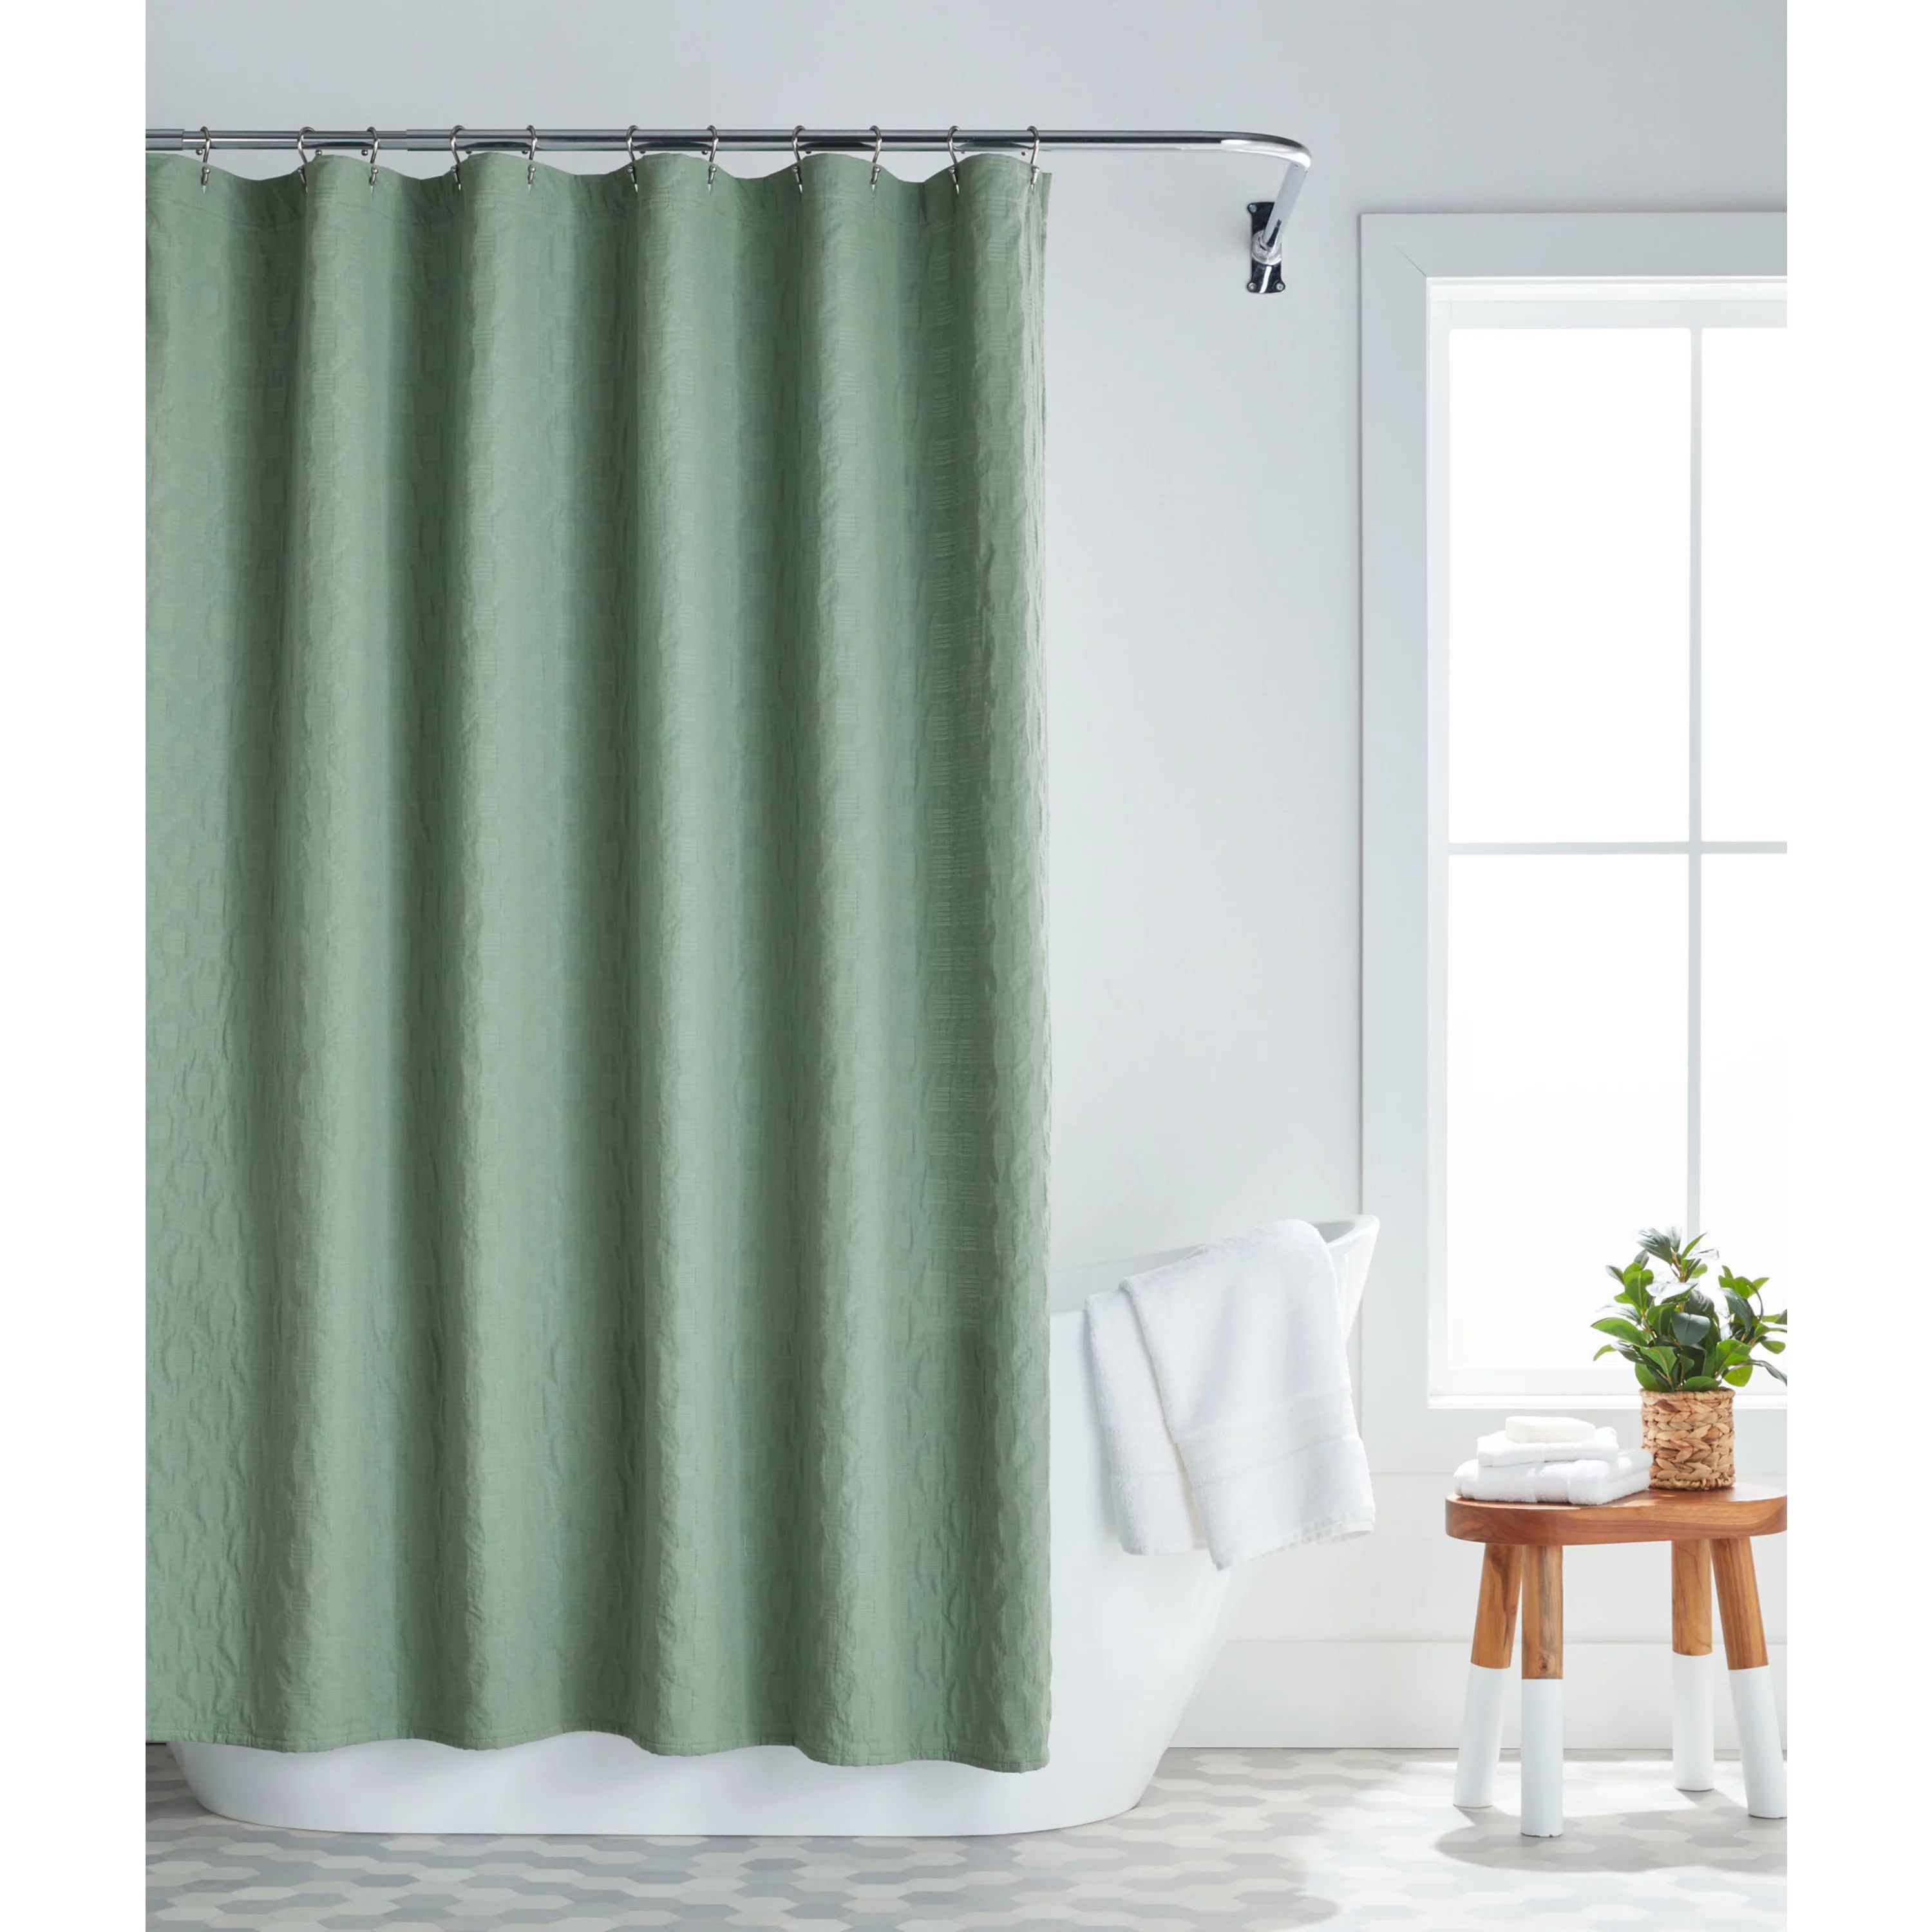 Better Homes & Gardens, Tonal Textured Shower Curtain Green, 72" x72", Count of 1, Cotton, Polyes... | Walmart (US)